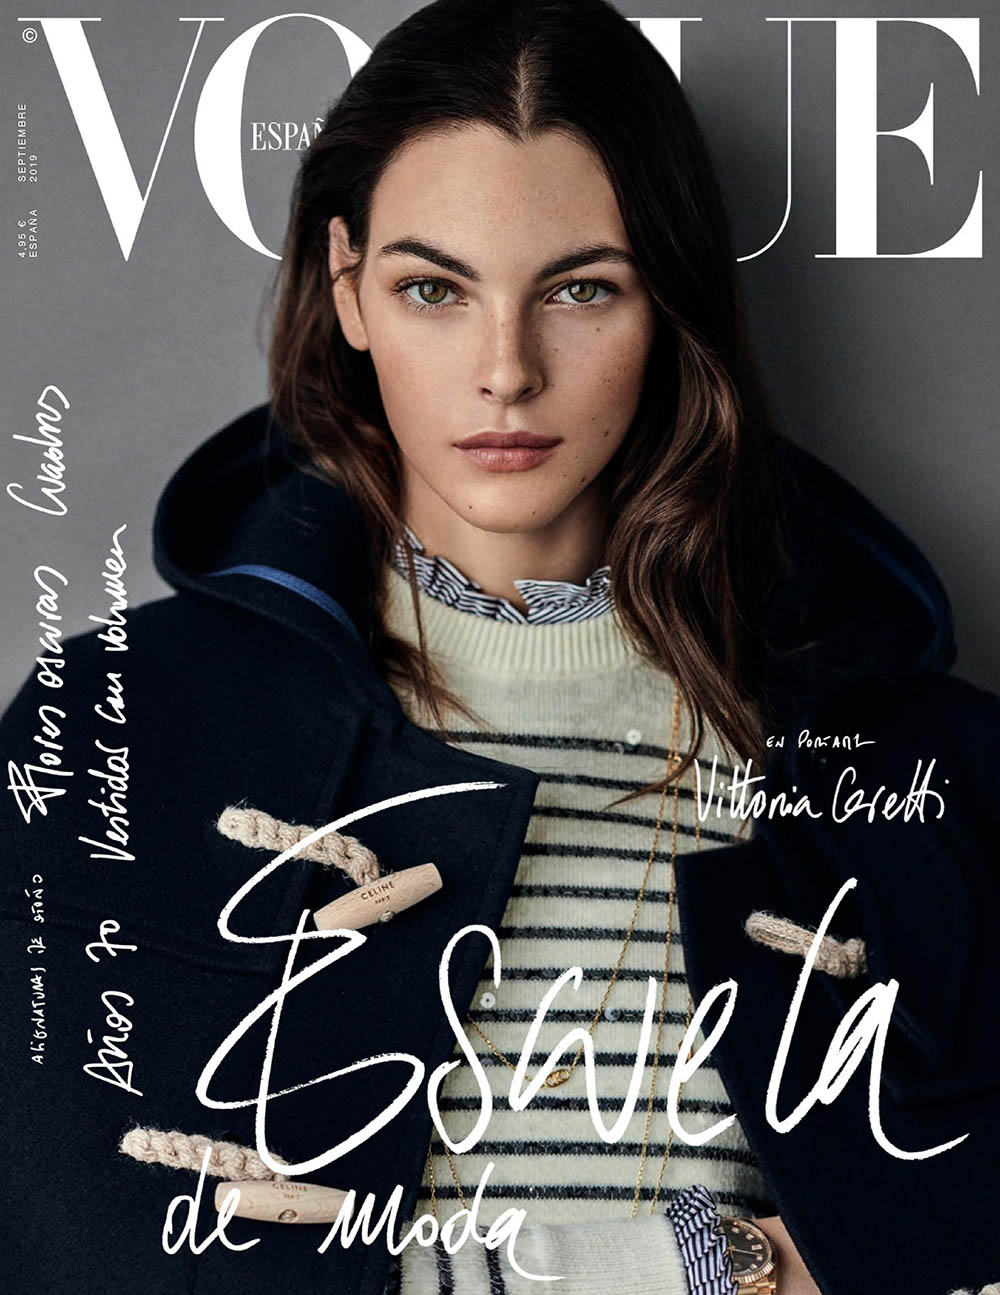 Vittoria Ceretti covers Vogue Spain September 2019 by Giampaolo Sgura